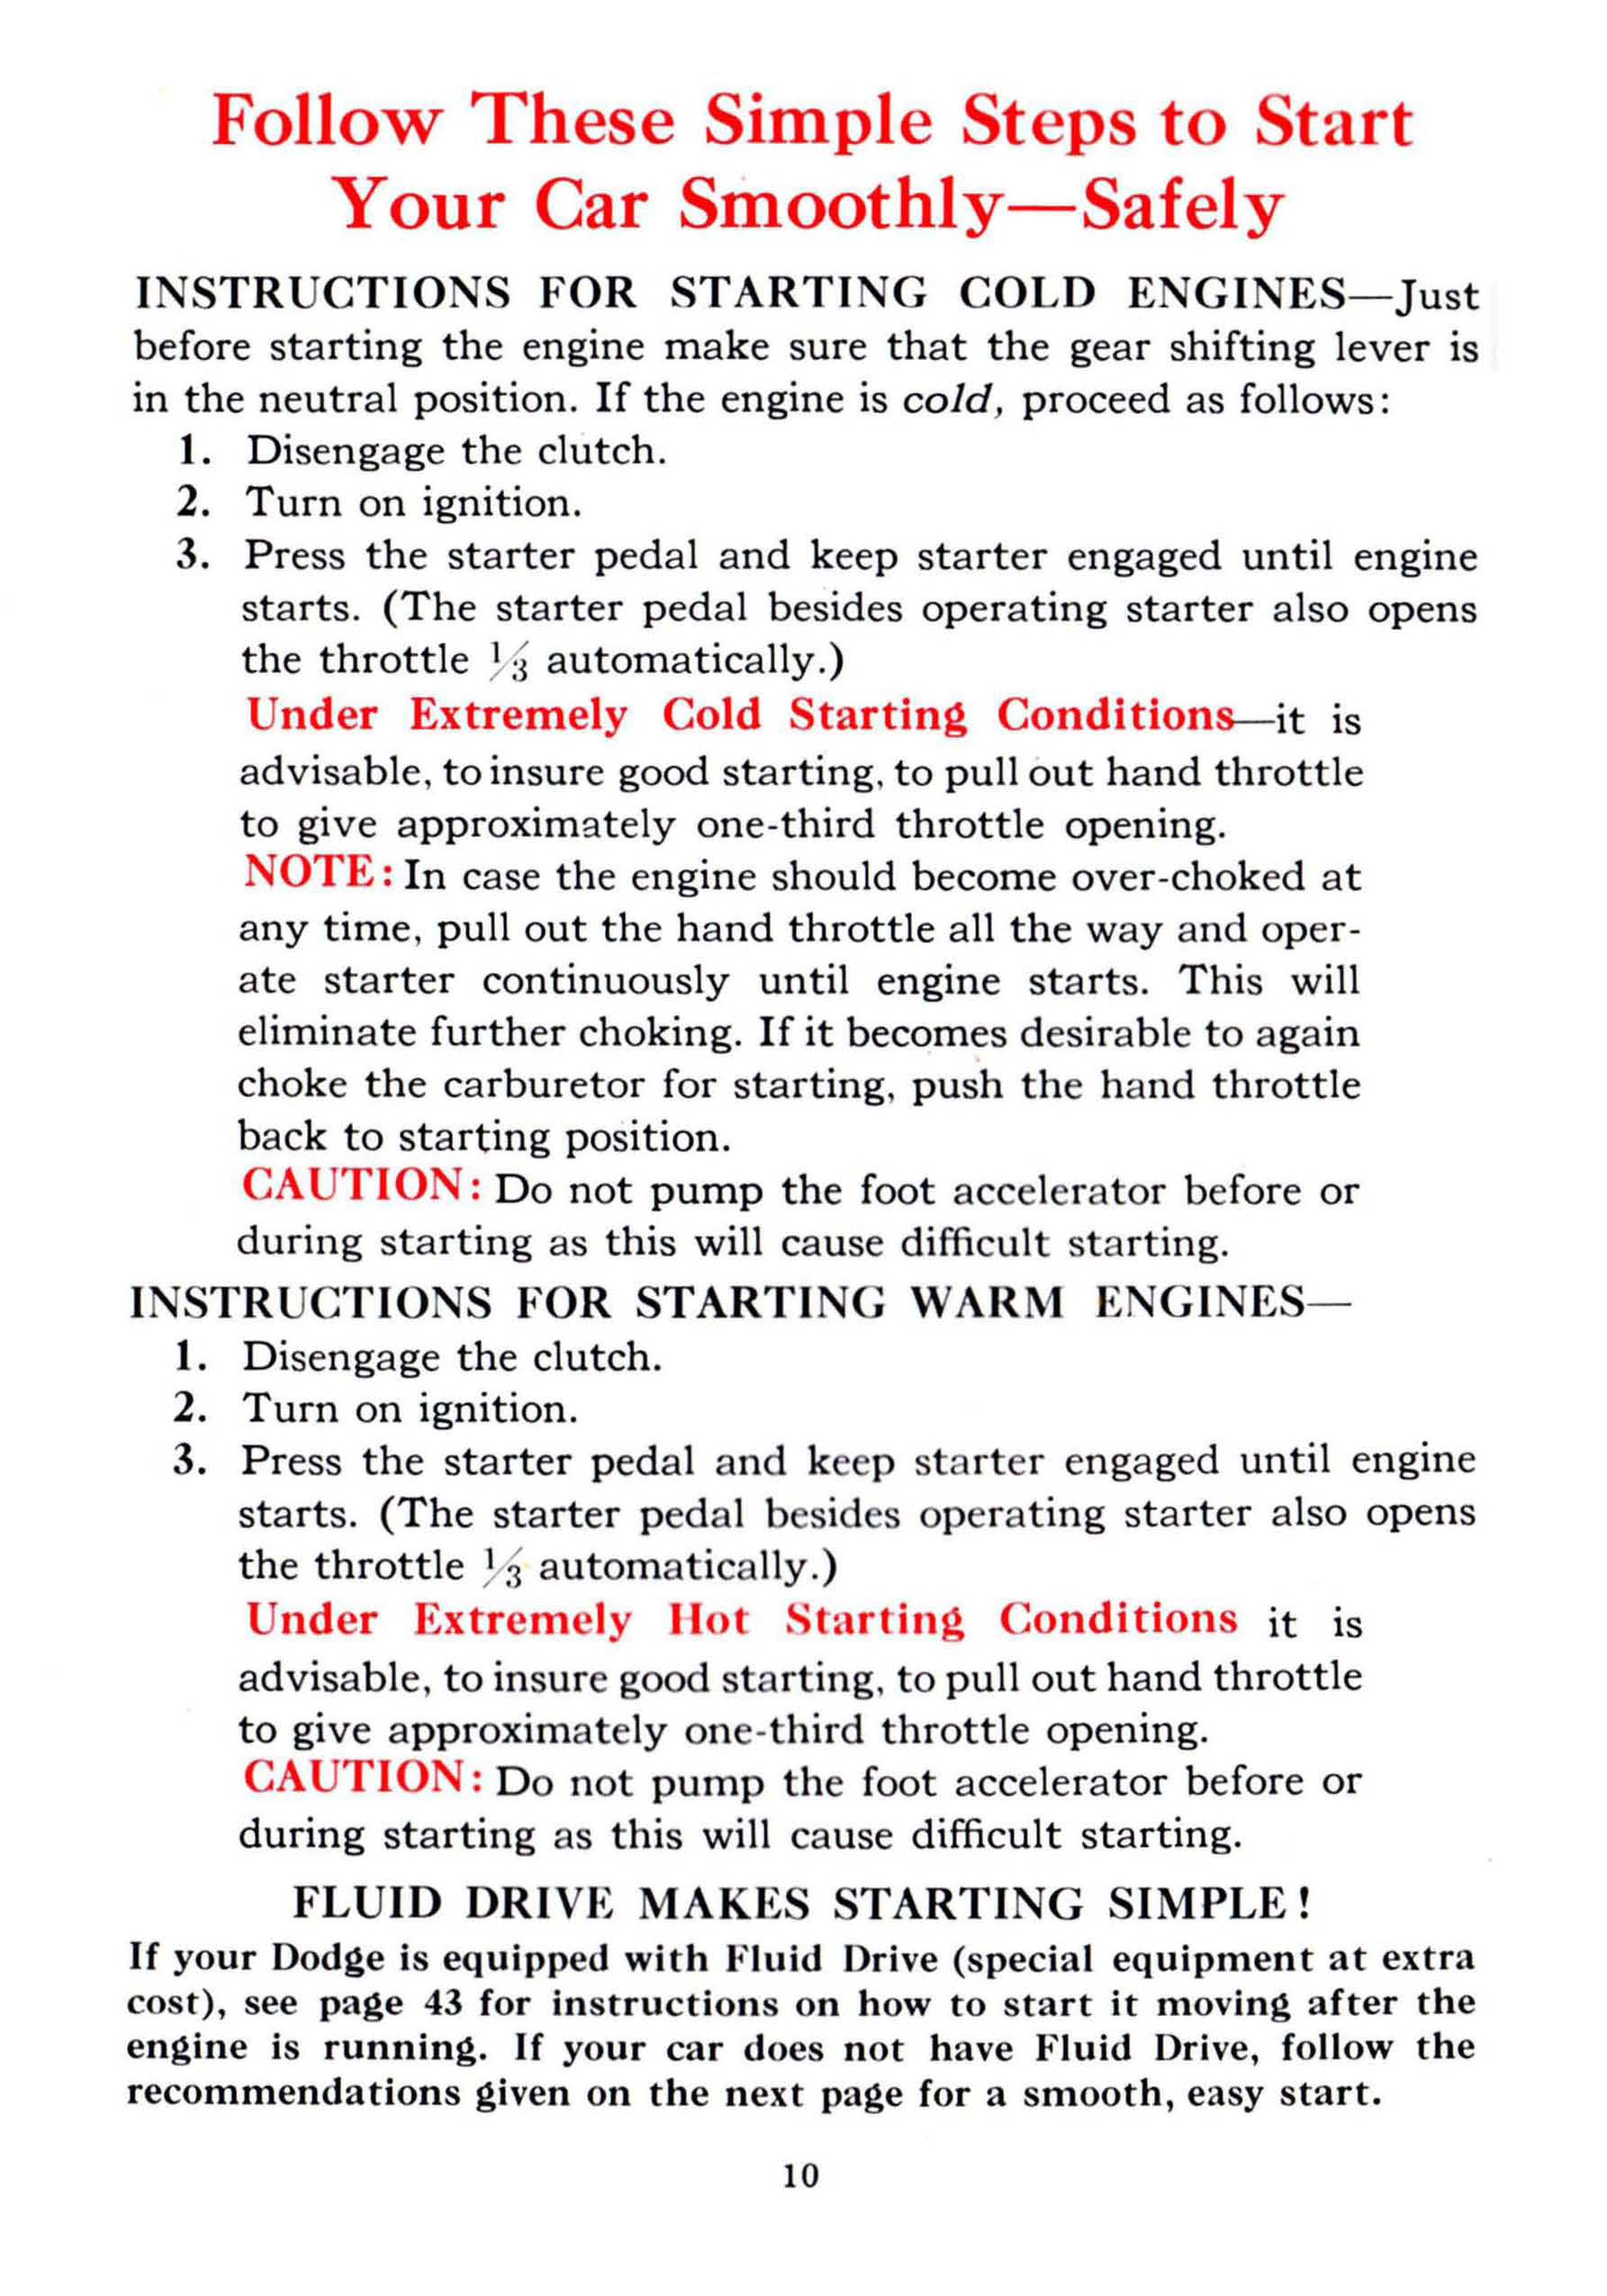 1941_Dodge_Owners_Manual-10